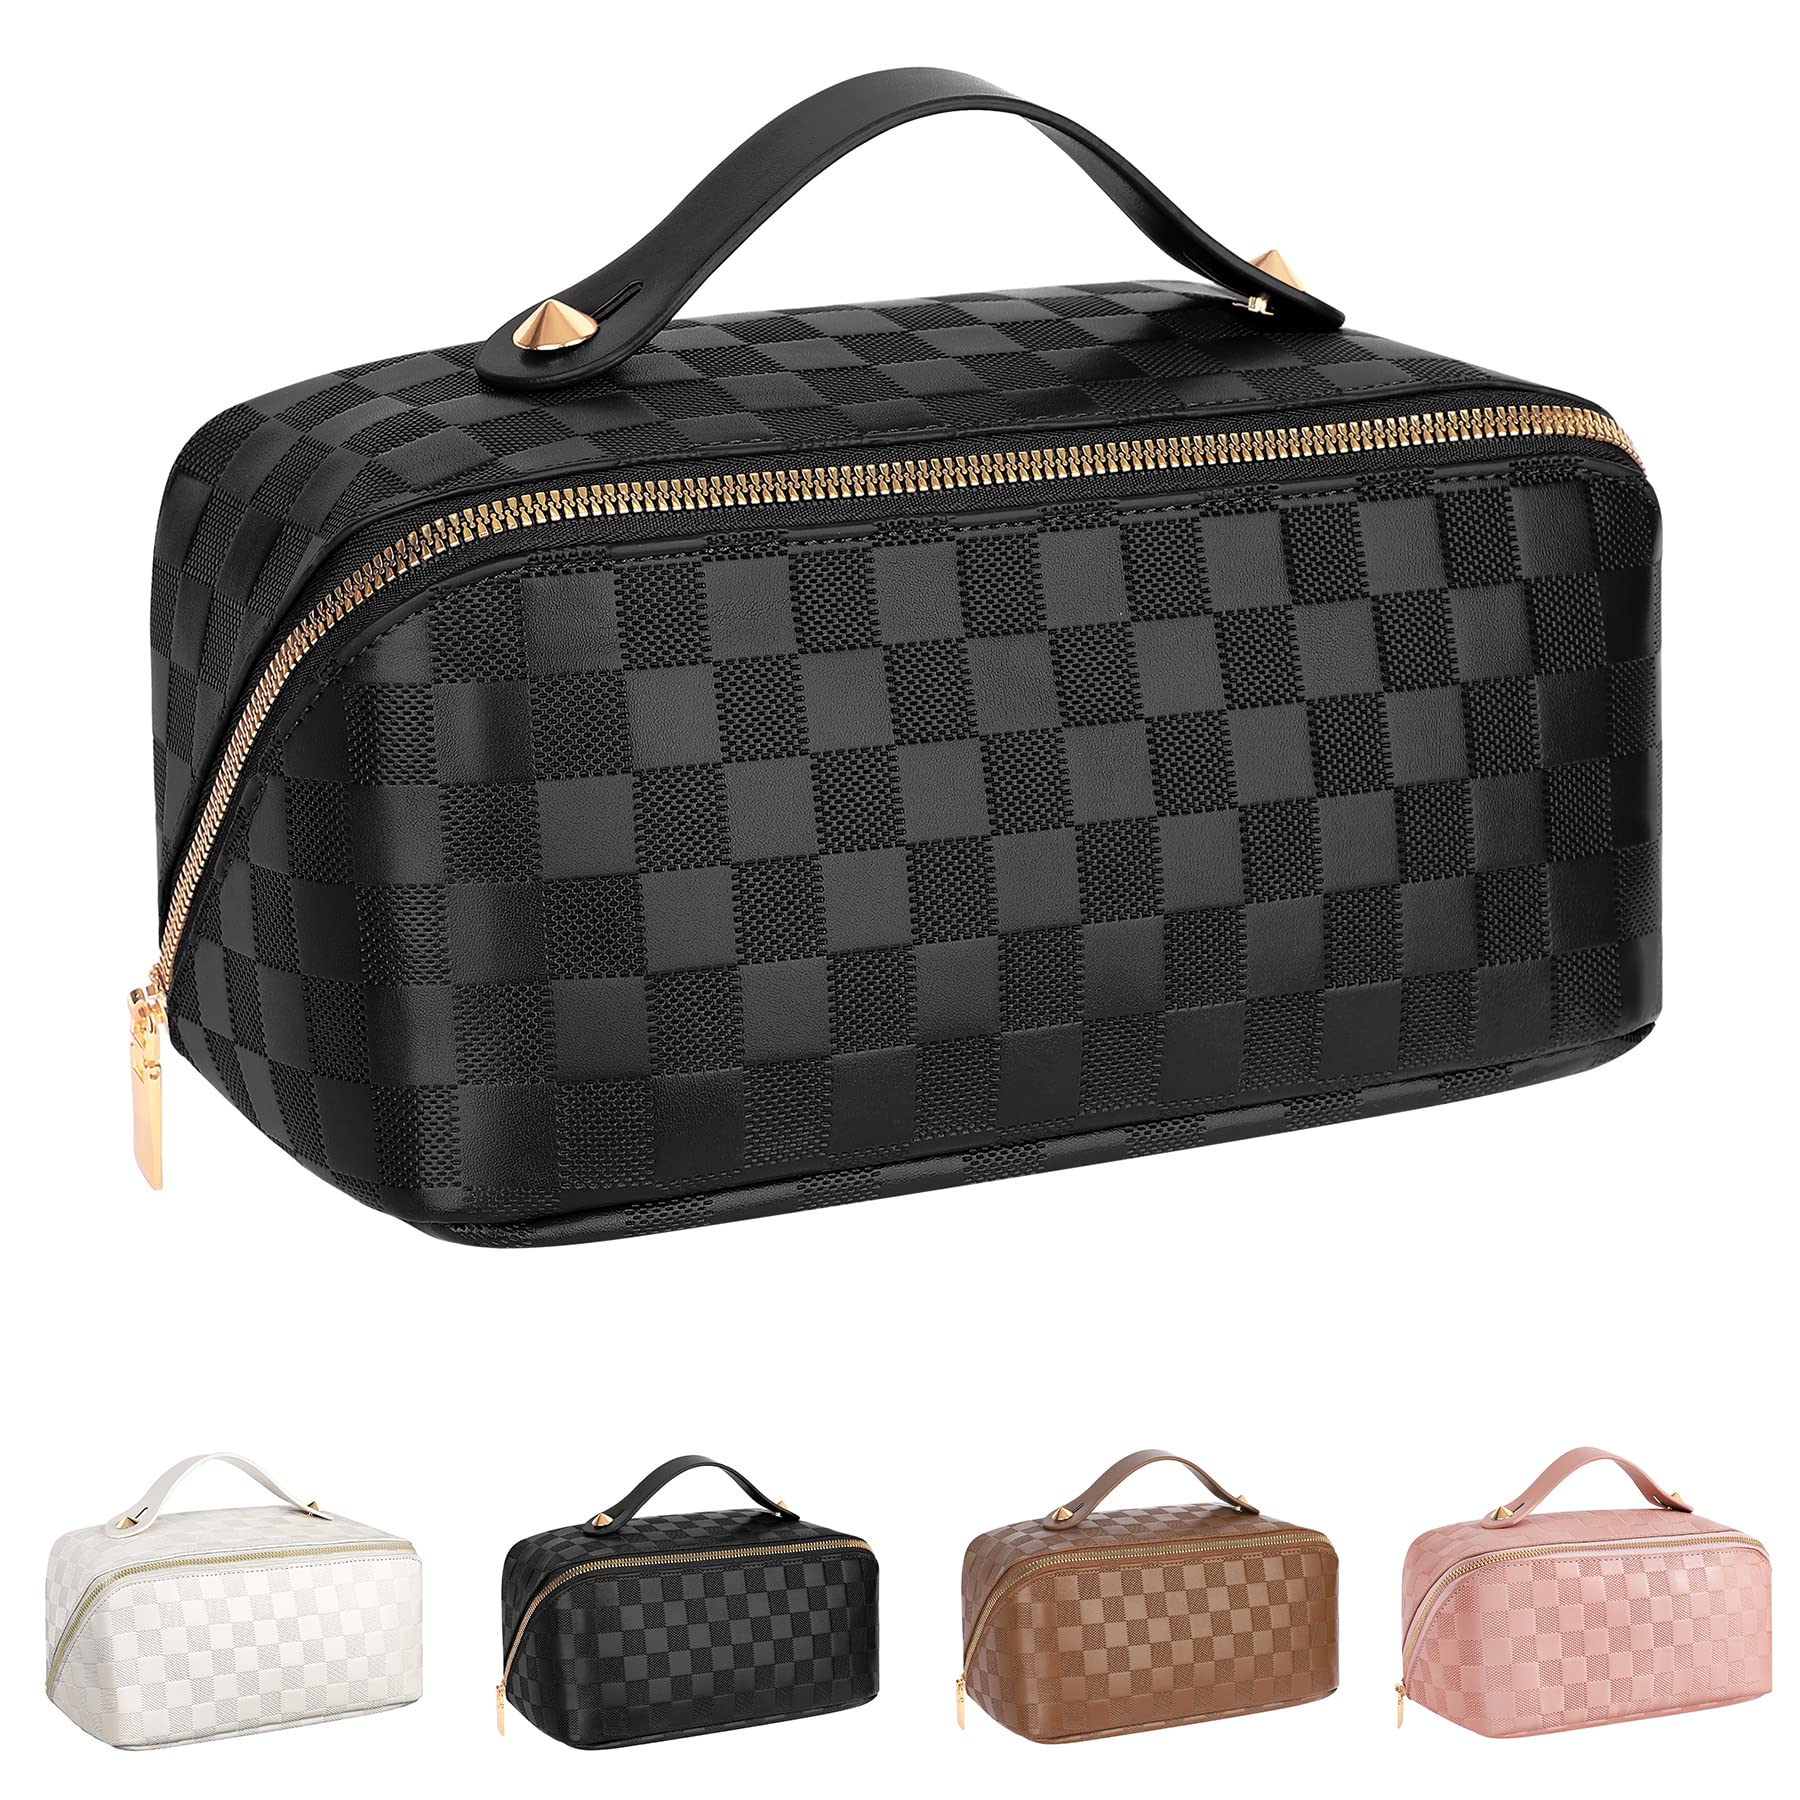  LOLDREAM Portable Checkered Makeup Bags,Large Capacity Travel Cosmetic  Bag,Large Open Lay Flat Makeup Bag Organizer,PU Leather Waterproof Toiletry  Bag : Beauty & Personal Care